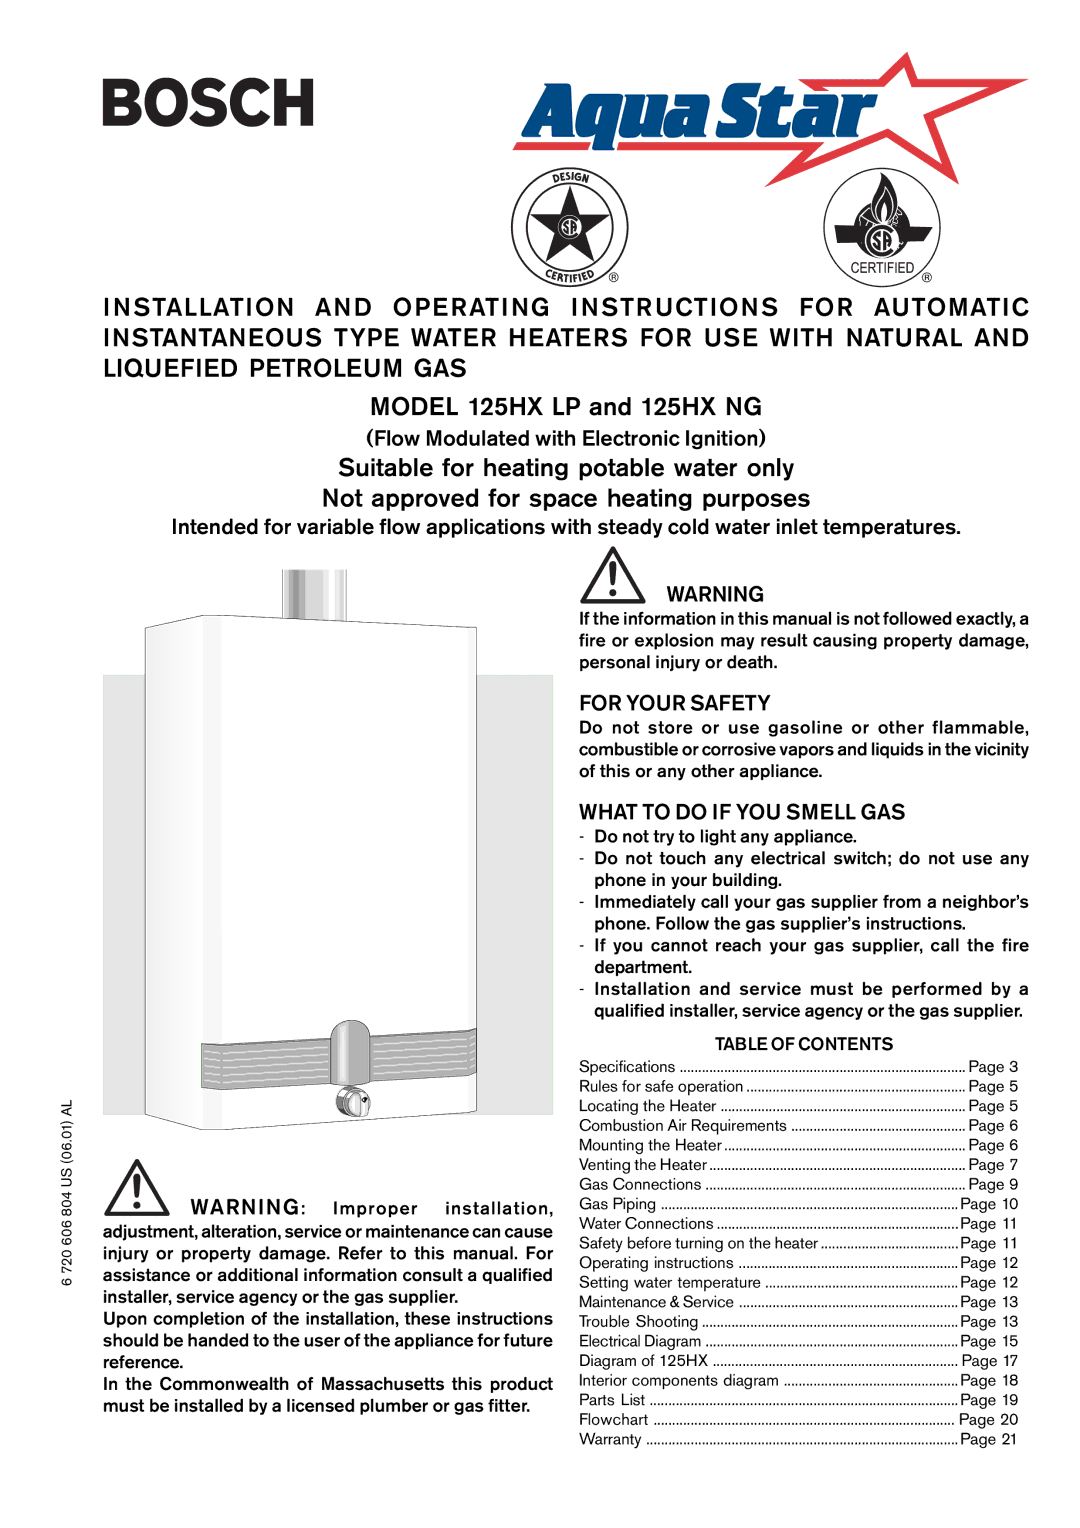 AquaStar 125HX NG, 125HX LP specifications For Your Safety, What to do if YOU Smell GAS, Table of Contents 